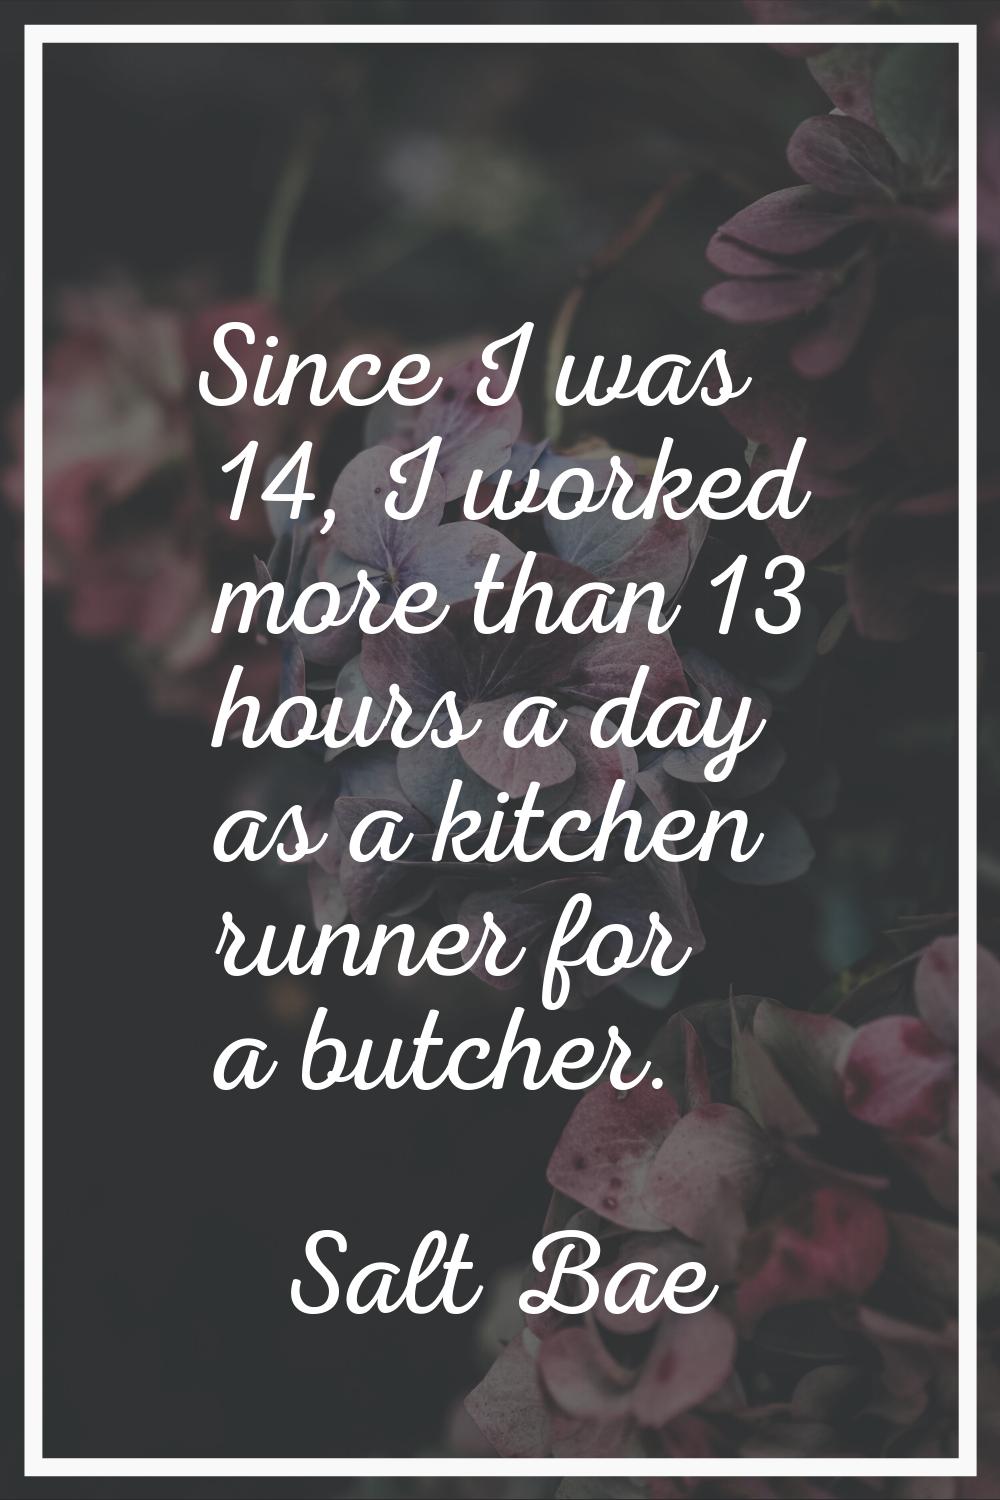 Since I was 14, I worked more than 13 hours a day as a kitchen runner for a butcher.